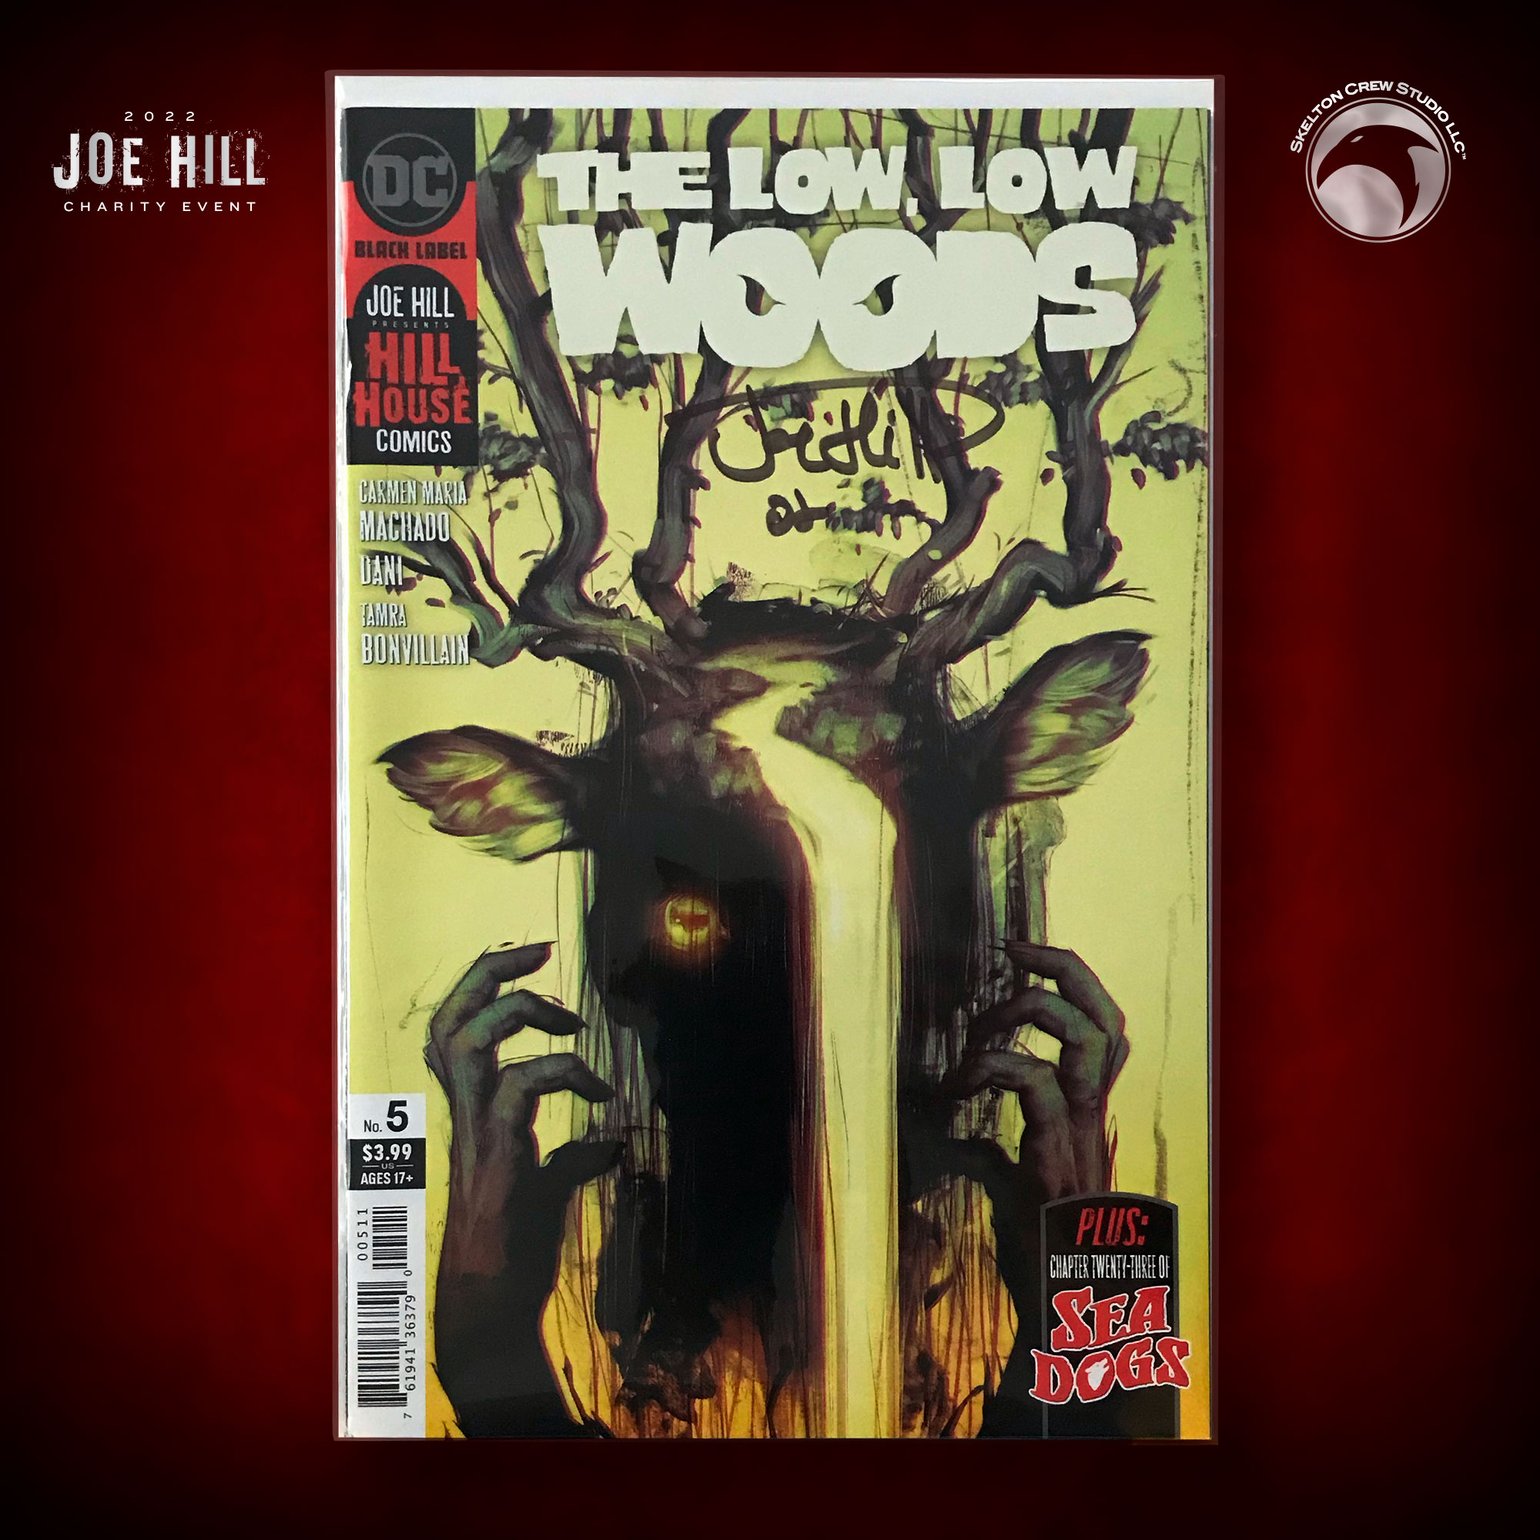 Image of JOE HILL 2022 CHARITY EVENT 44: SIGNED "The Low Low Woods" #5